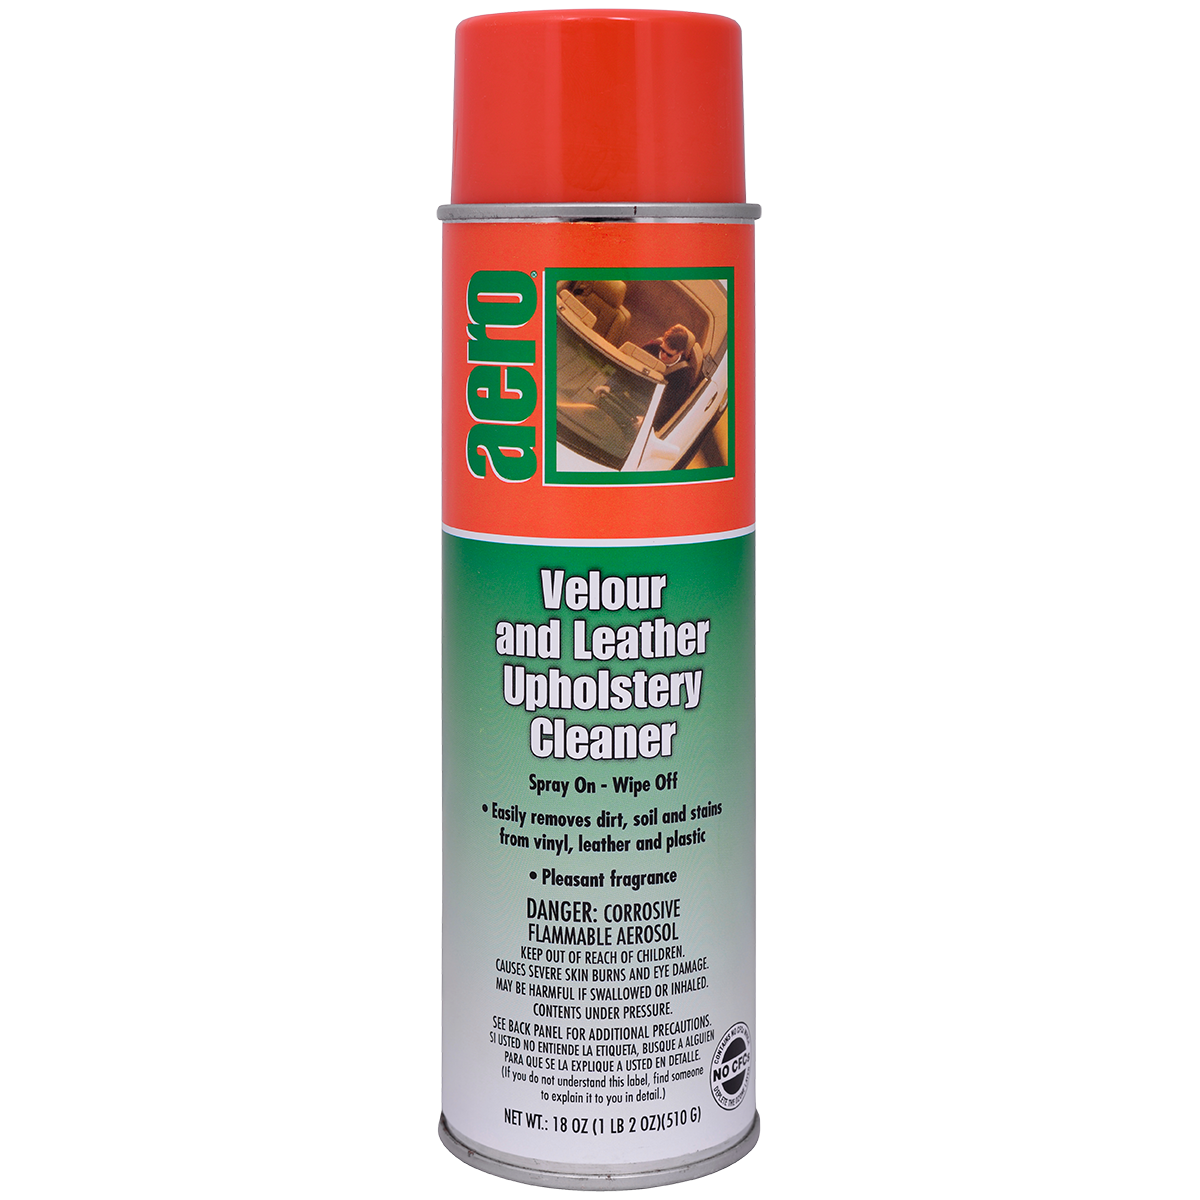 Velour & Leather - Upolstery Cleaner, 18oz Aerosol | 55302